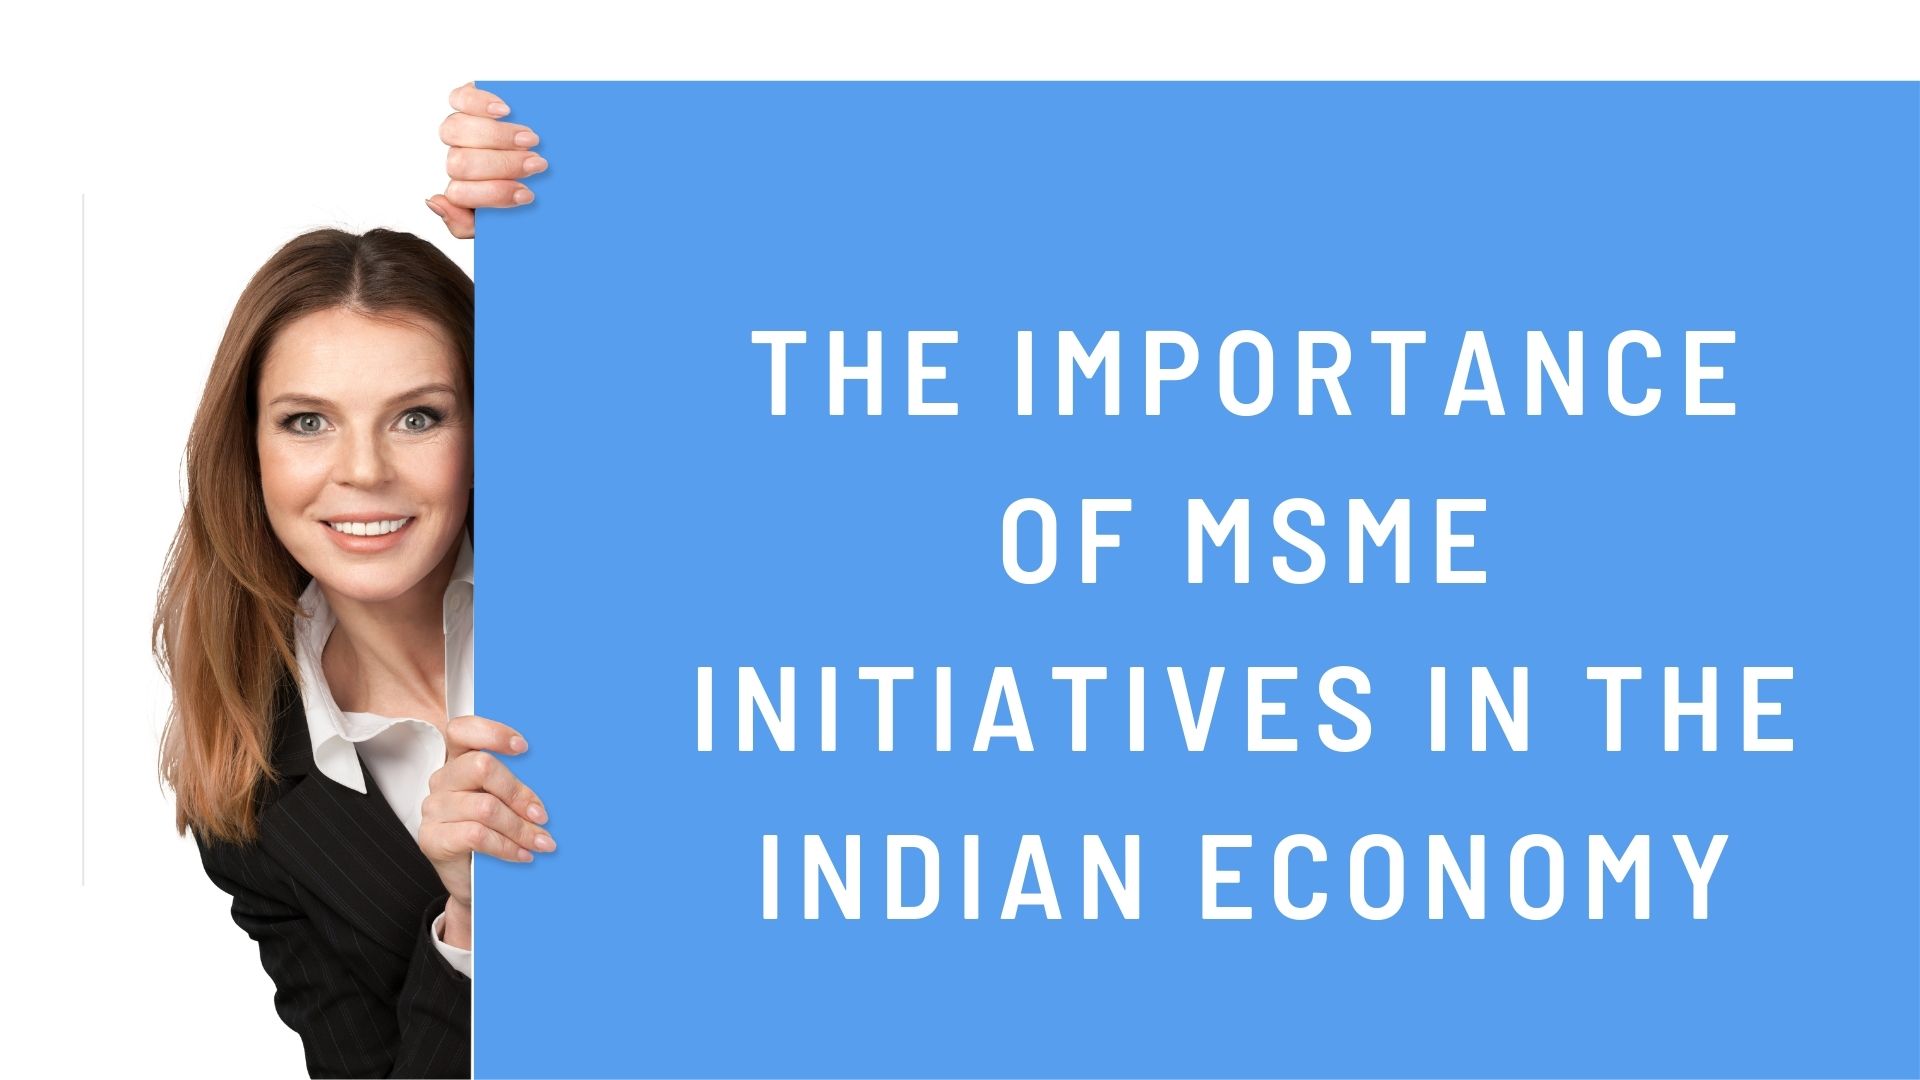 The importance of MSME initiatives in the Indian economy